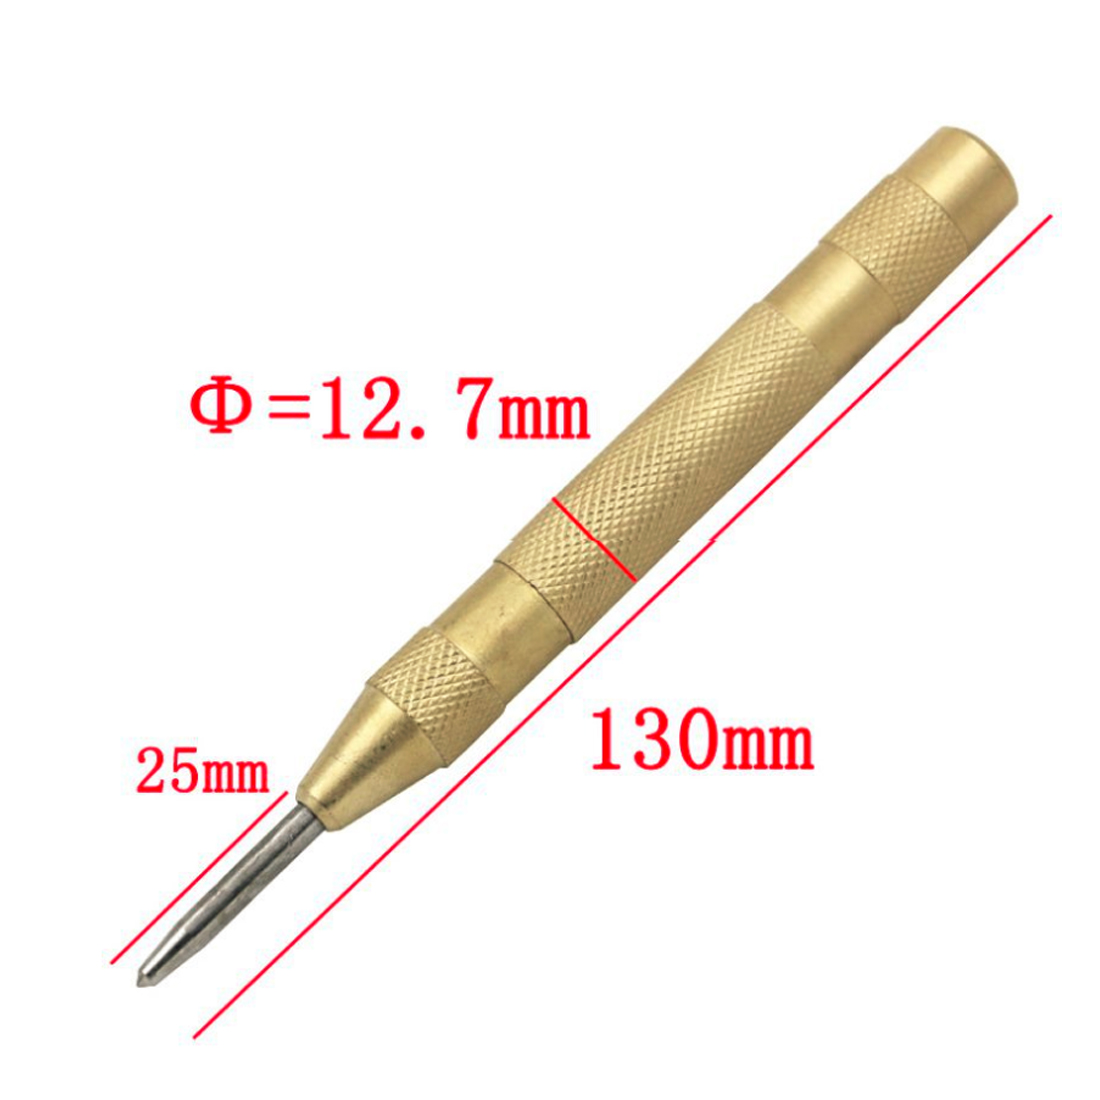 5 Inch Automatic Punching Woodworking Tools Drill Bit Electric Tools Metal Drills Center Pin Punch Spring Loaded Dent Marker